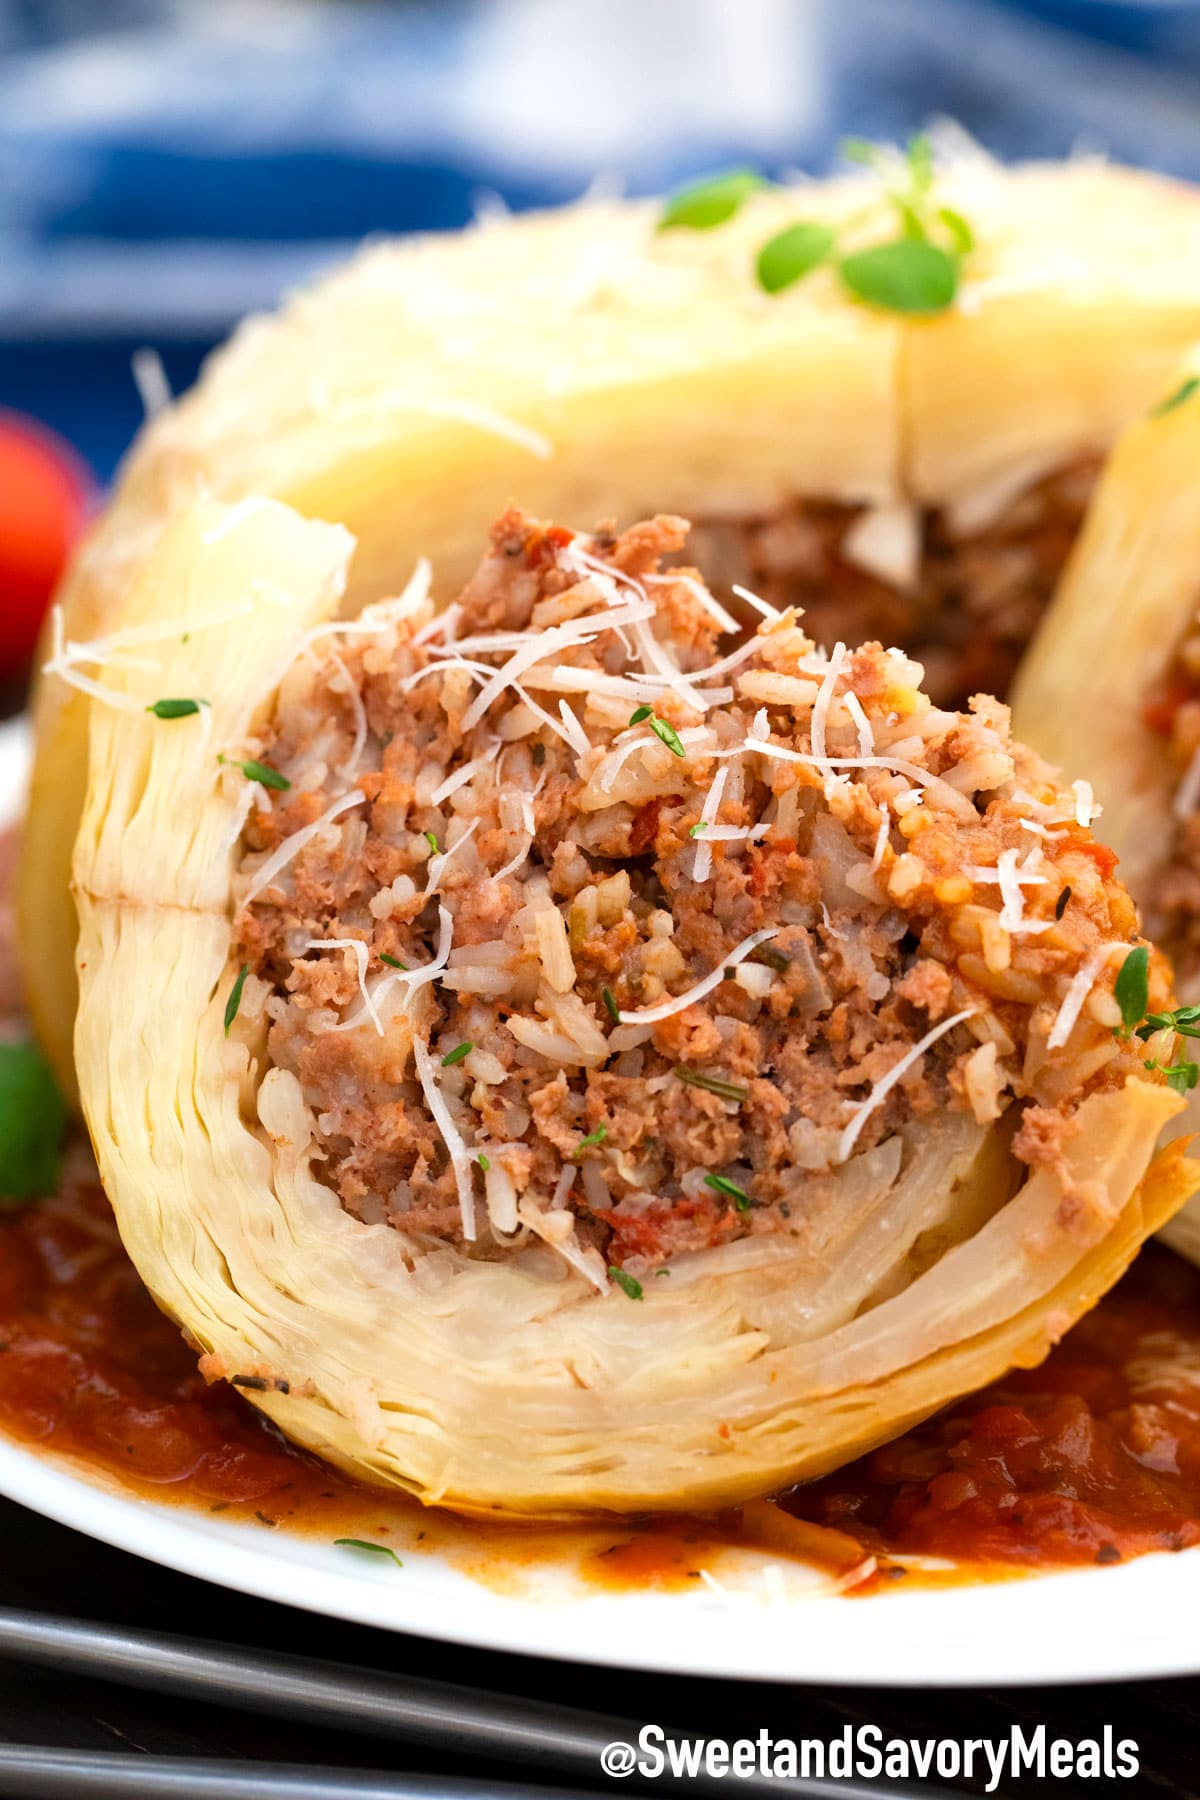 Stuffed Whole Cabbage Recipe [Video] - Sweet and Savory Meals